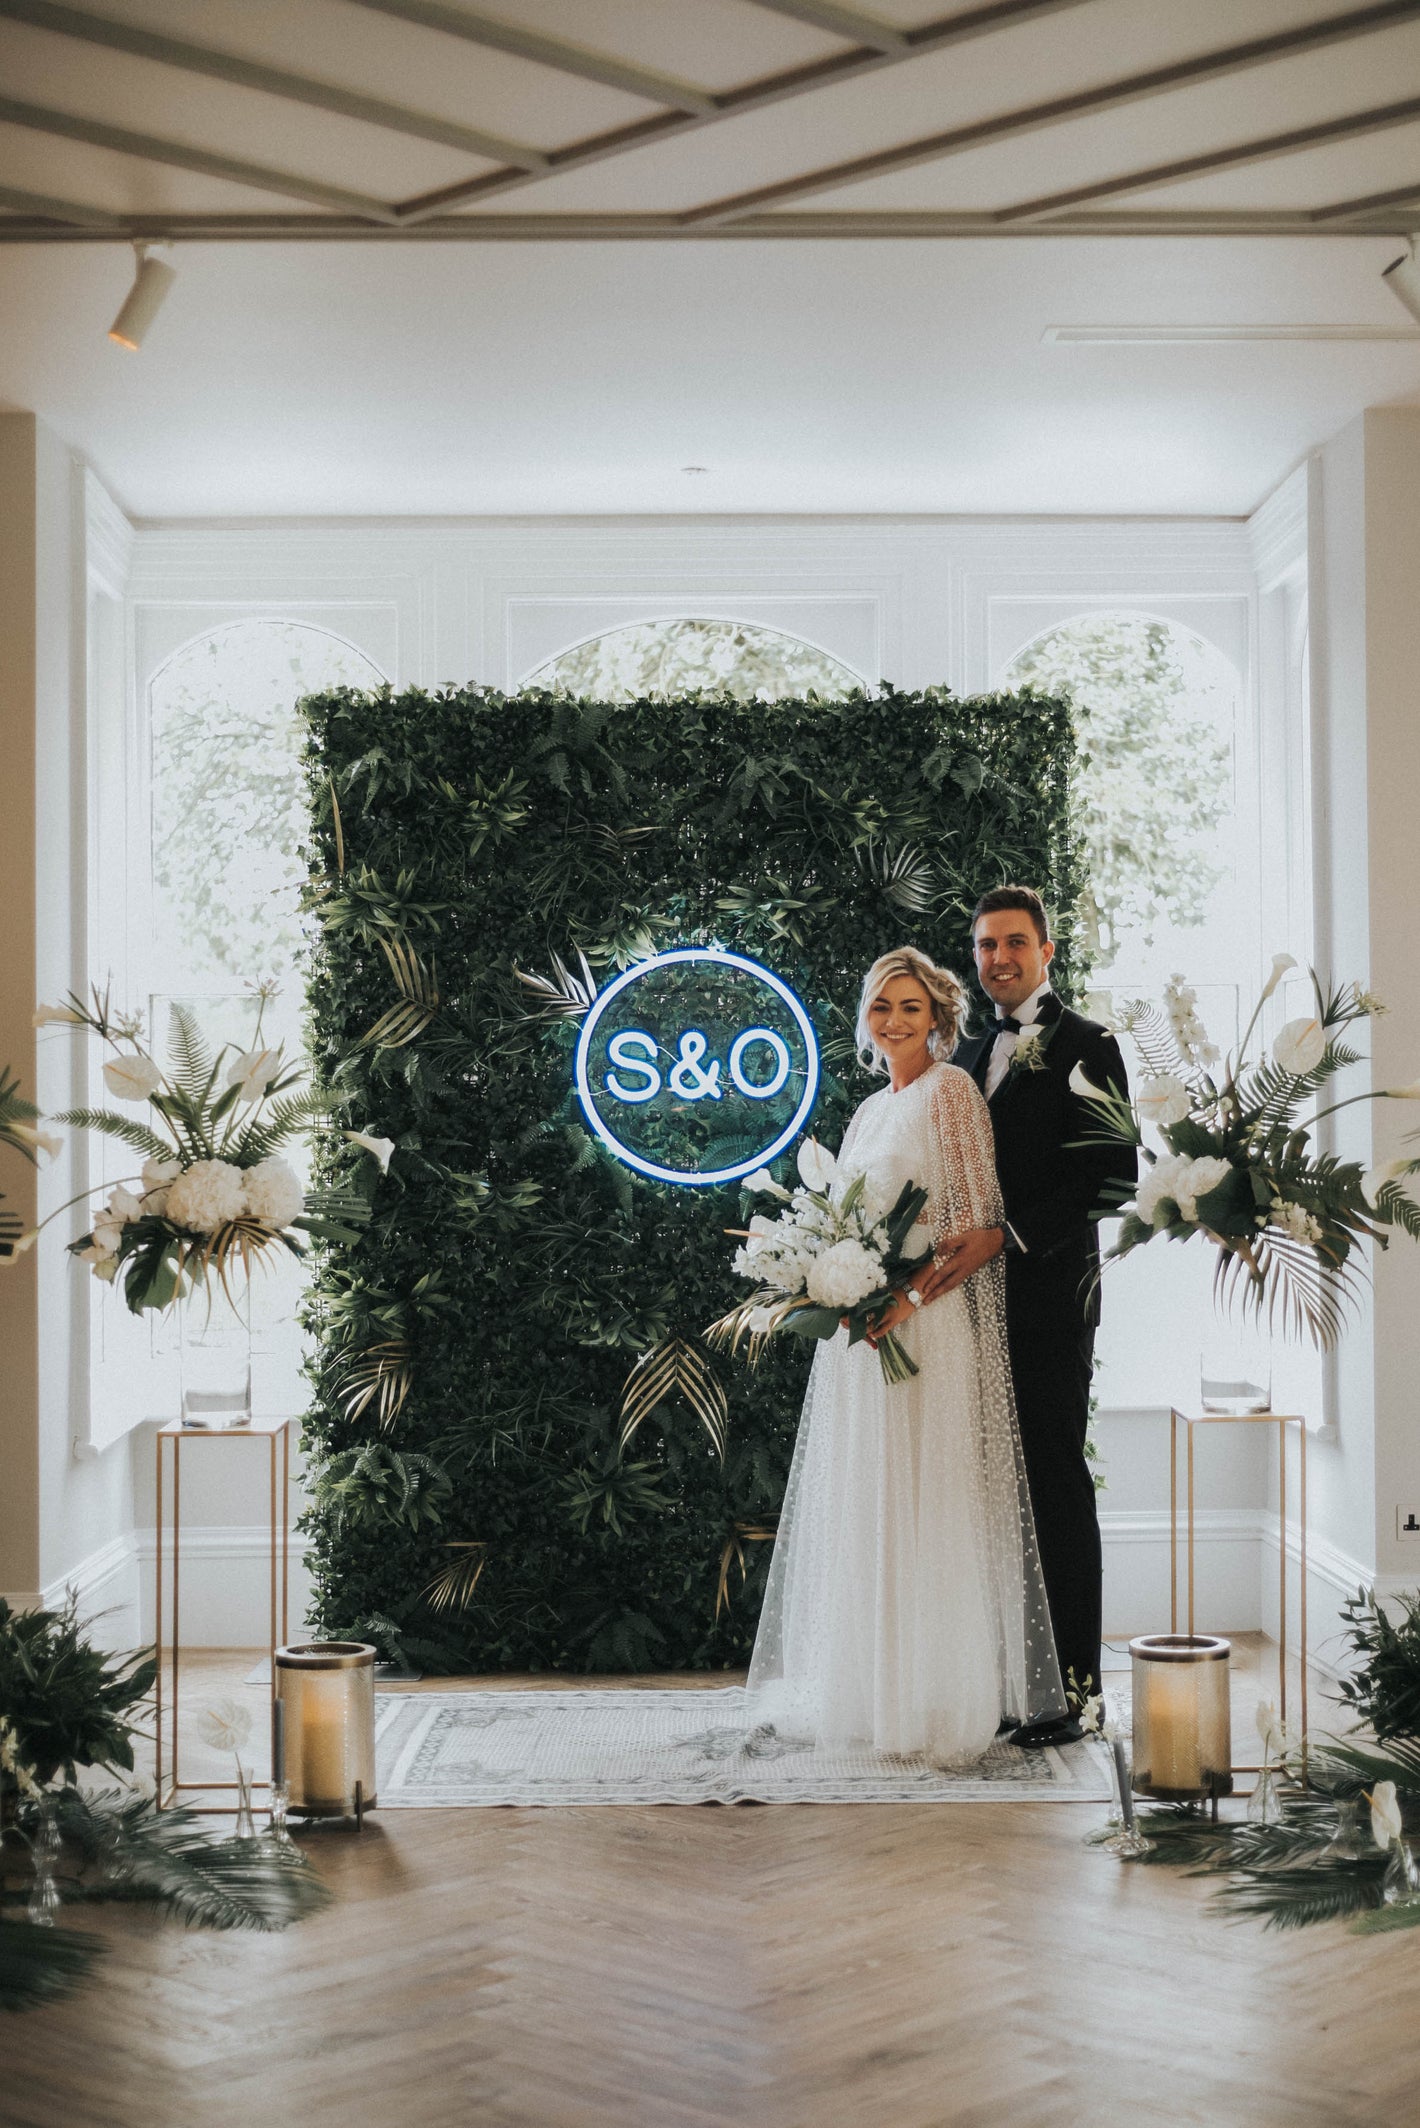 A bride and groom on their wedding standing in front of a ceremony backdrop with a custom neon sign for wedding by Wildfire Neon in Manchester, UK